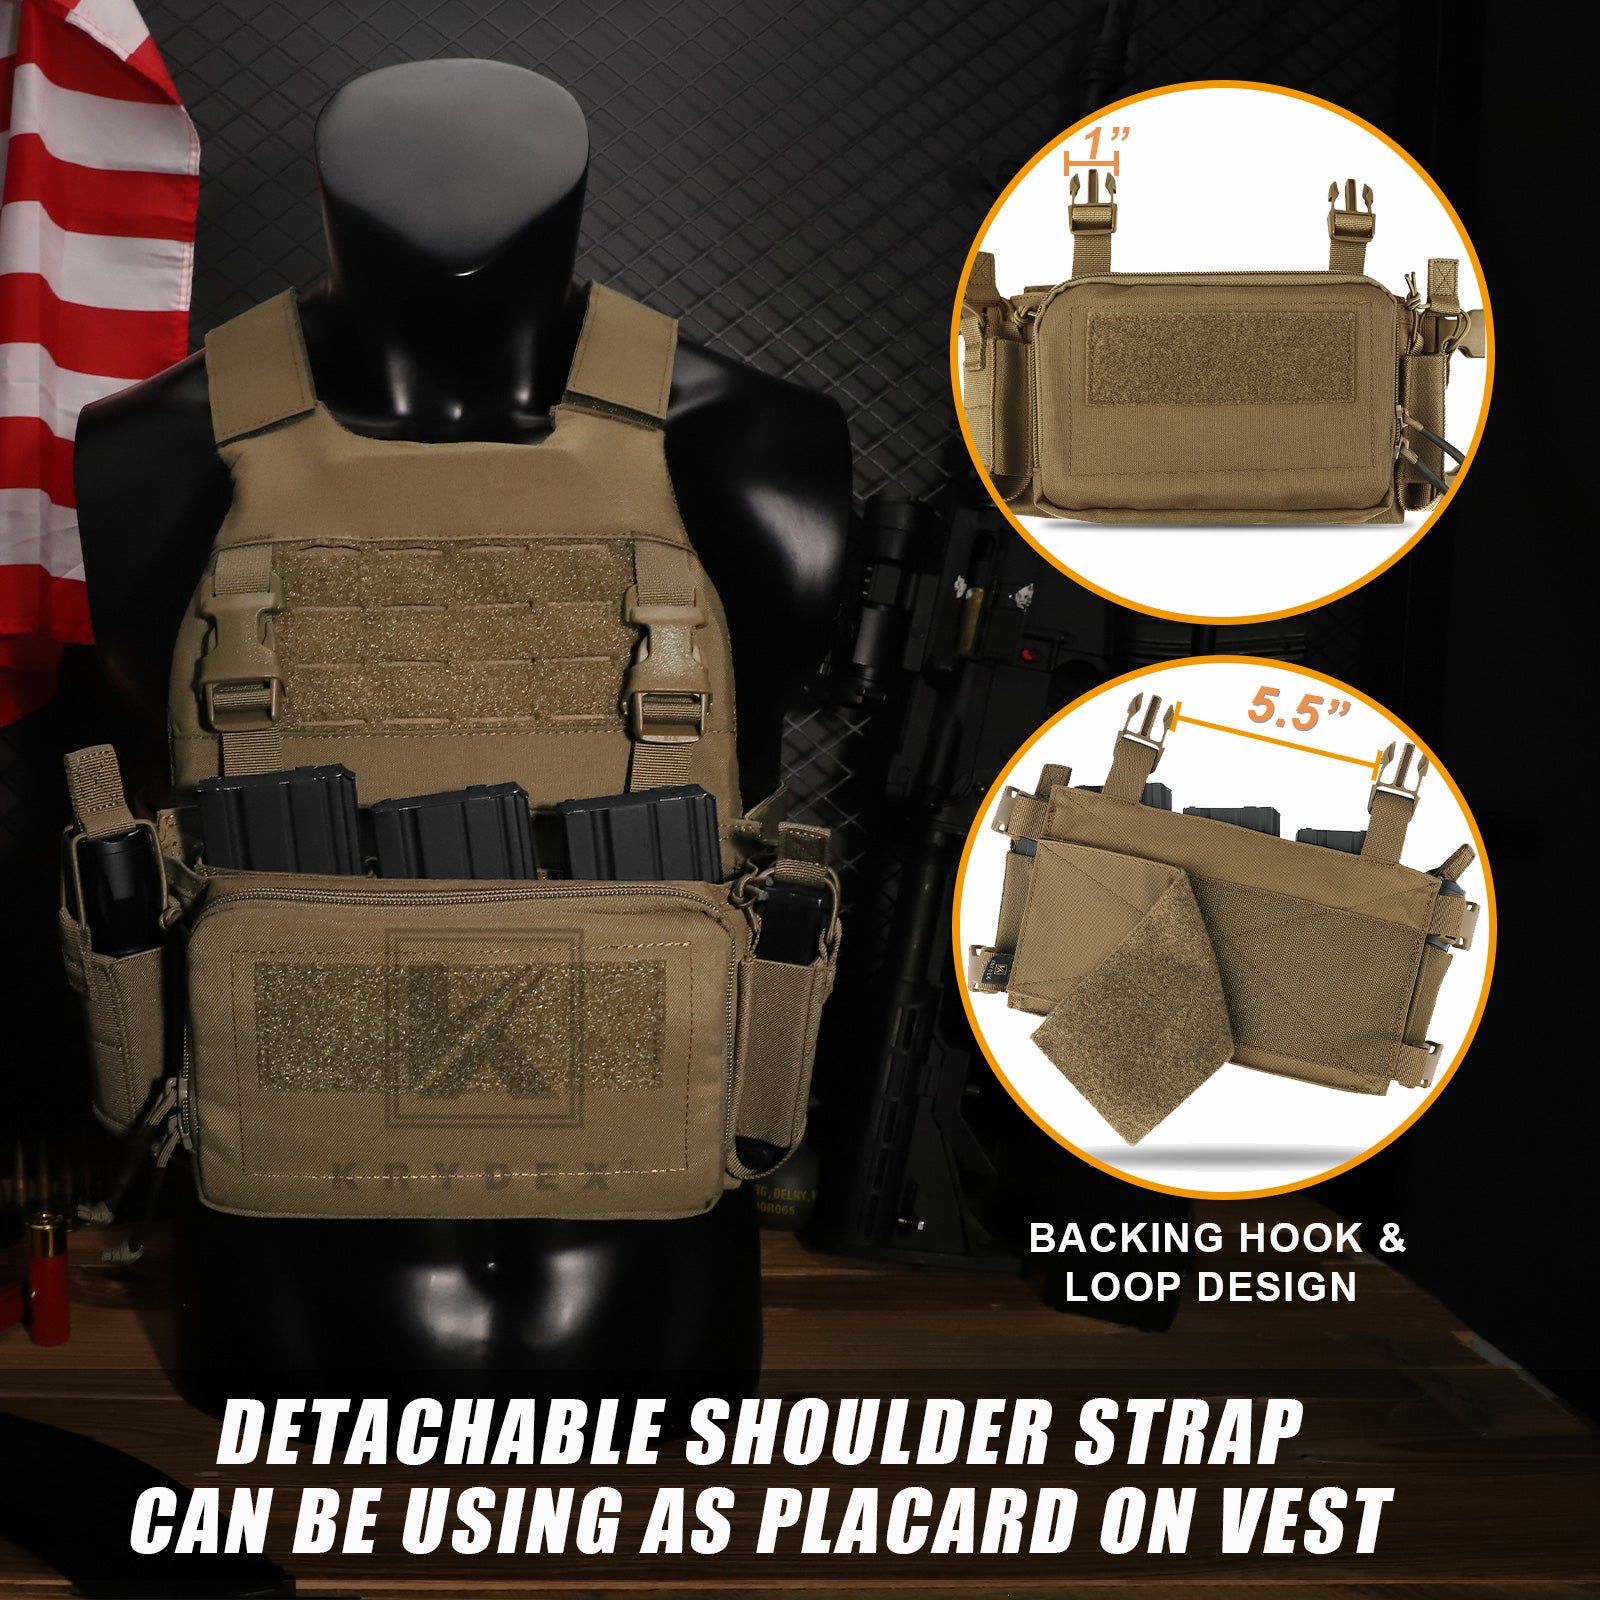 KRYDEX Tactical Concealed Molle Recon Combat Chest Rig Bag Pack